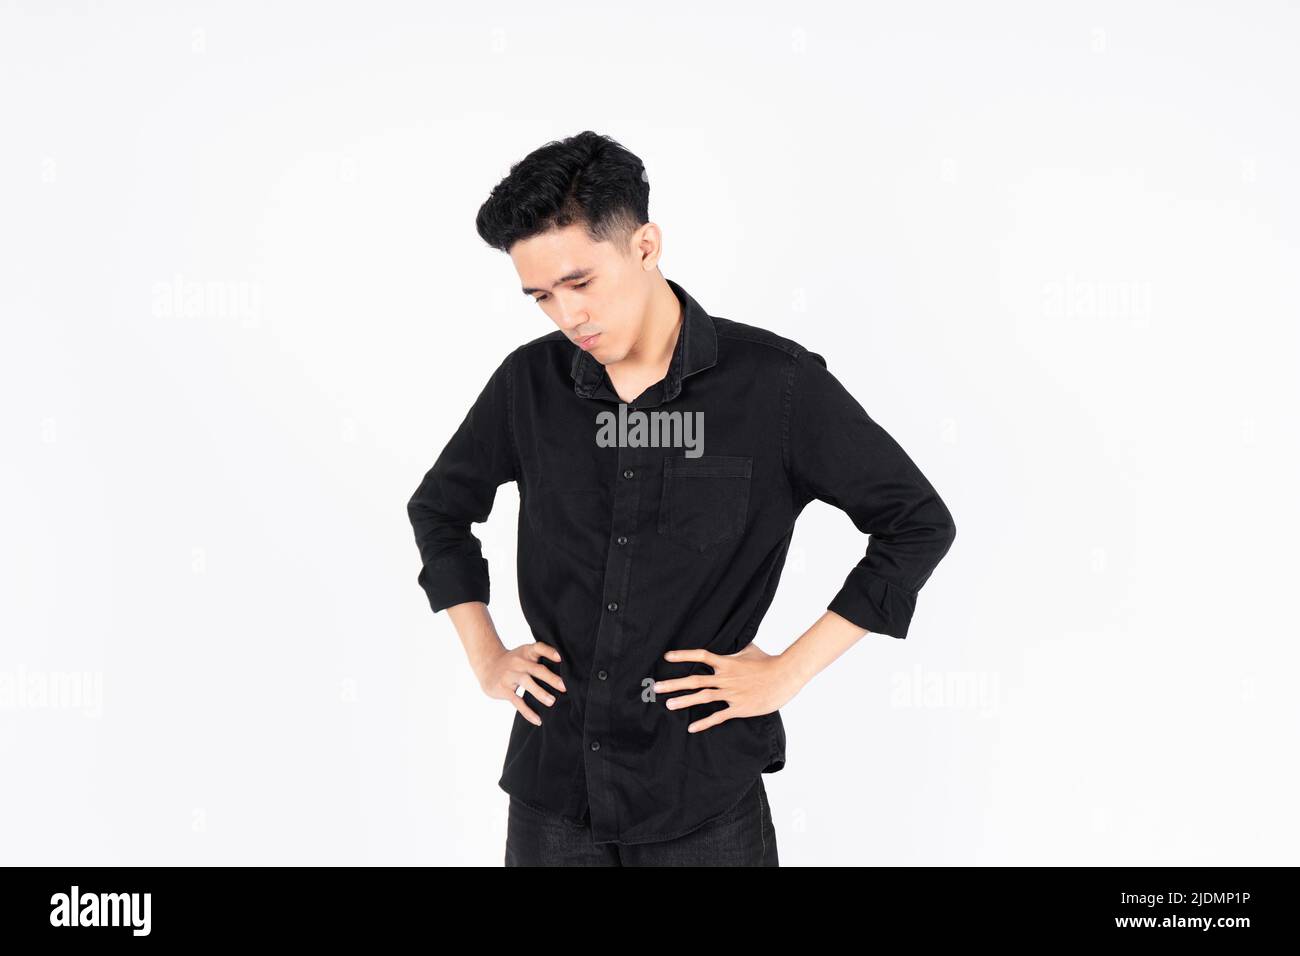 Young men show signs of disappointment with unsatisfactory work results or tired of what they are doing. with a black shirt on a white background. Stock Photo